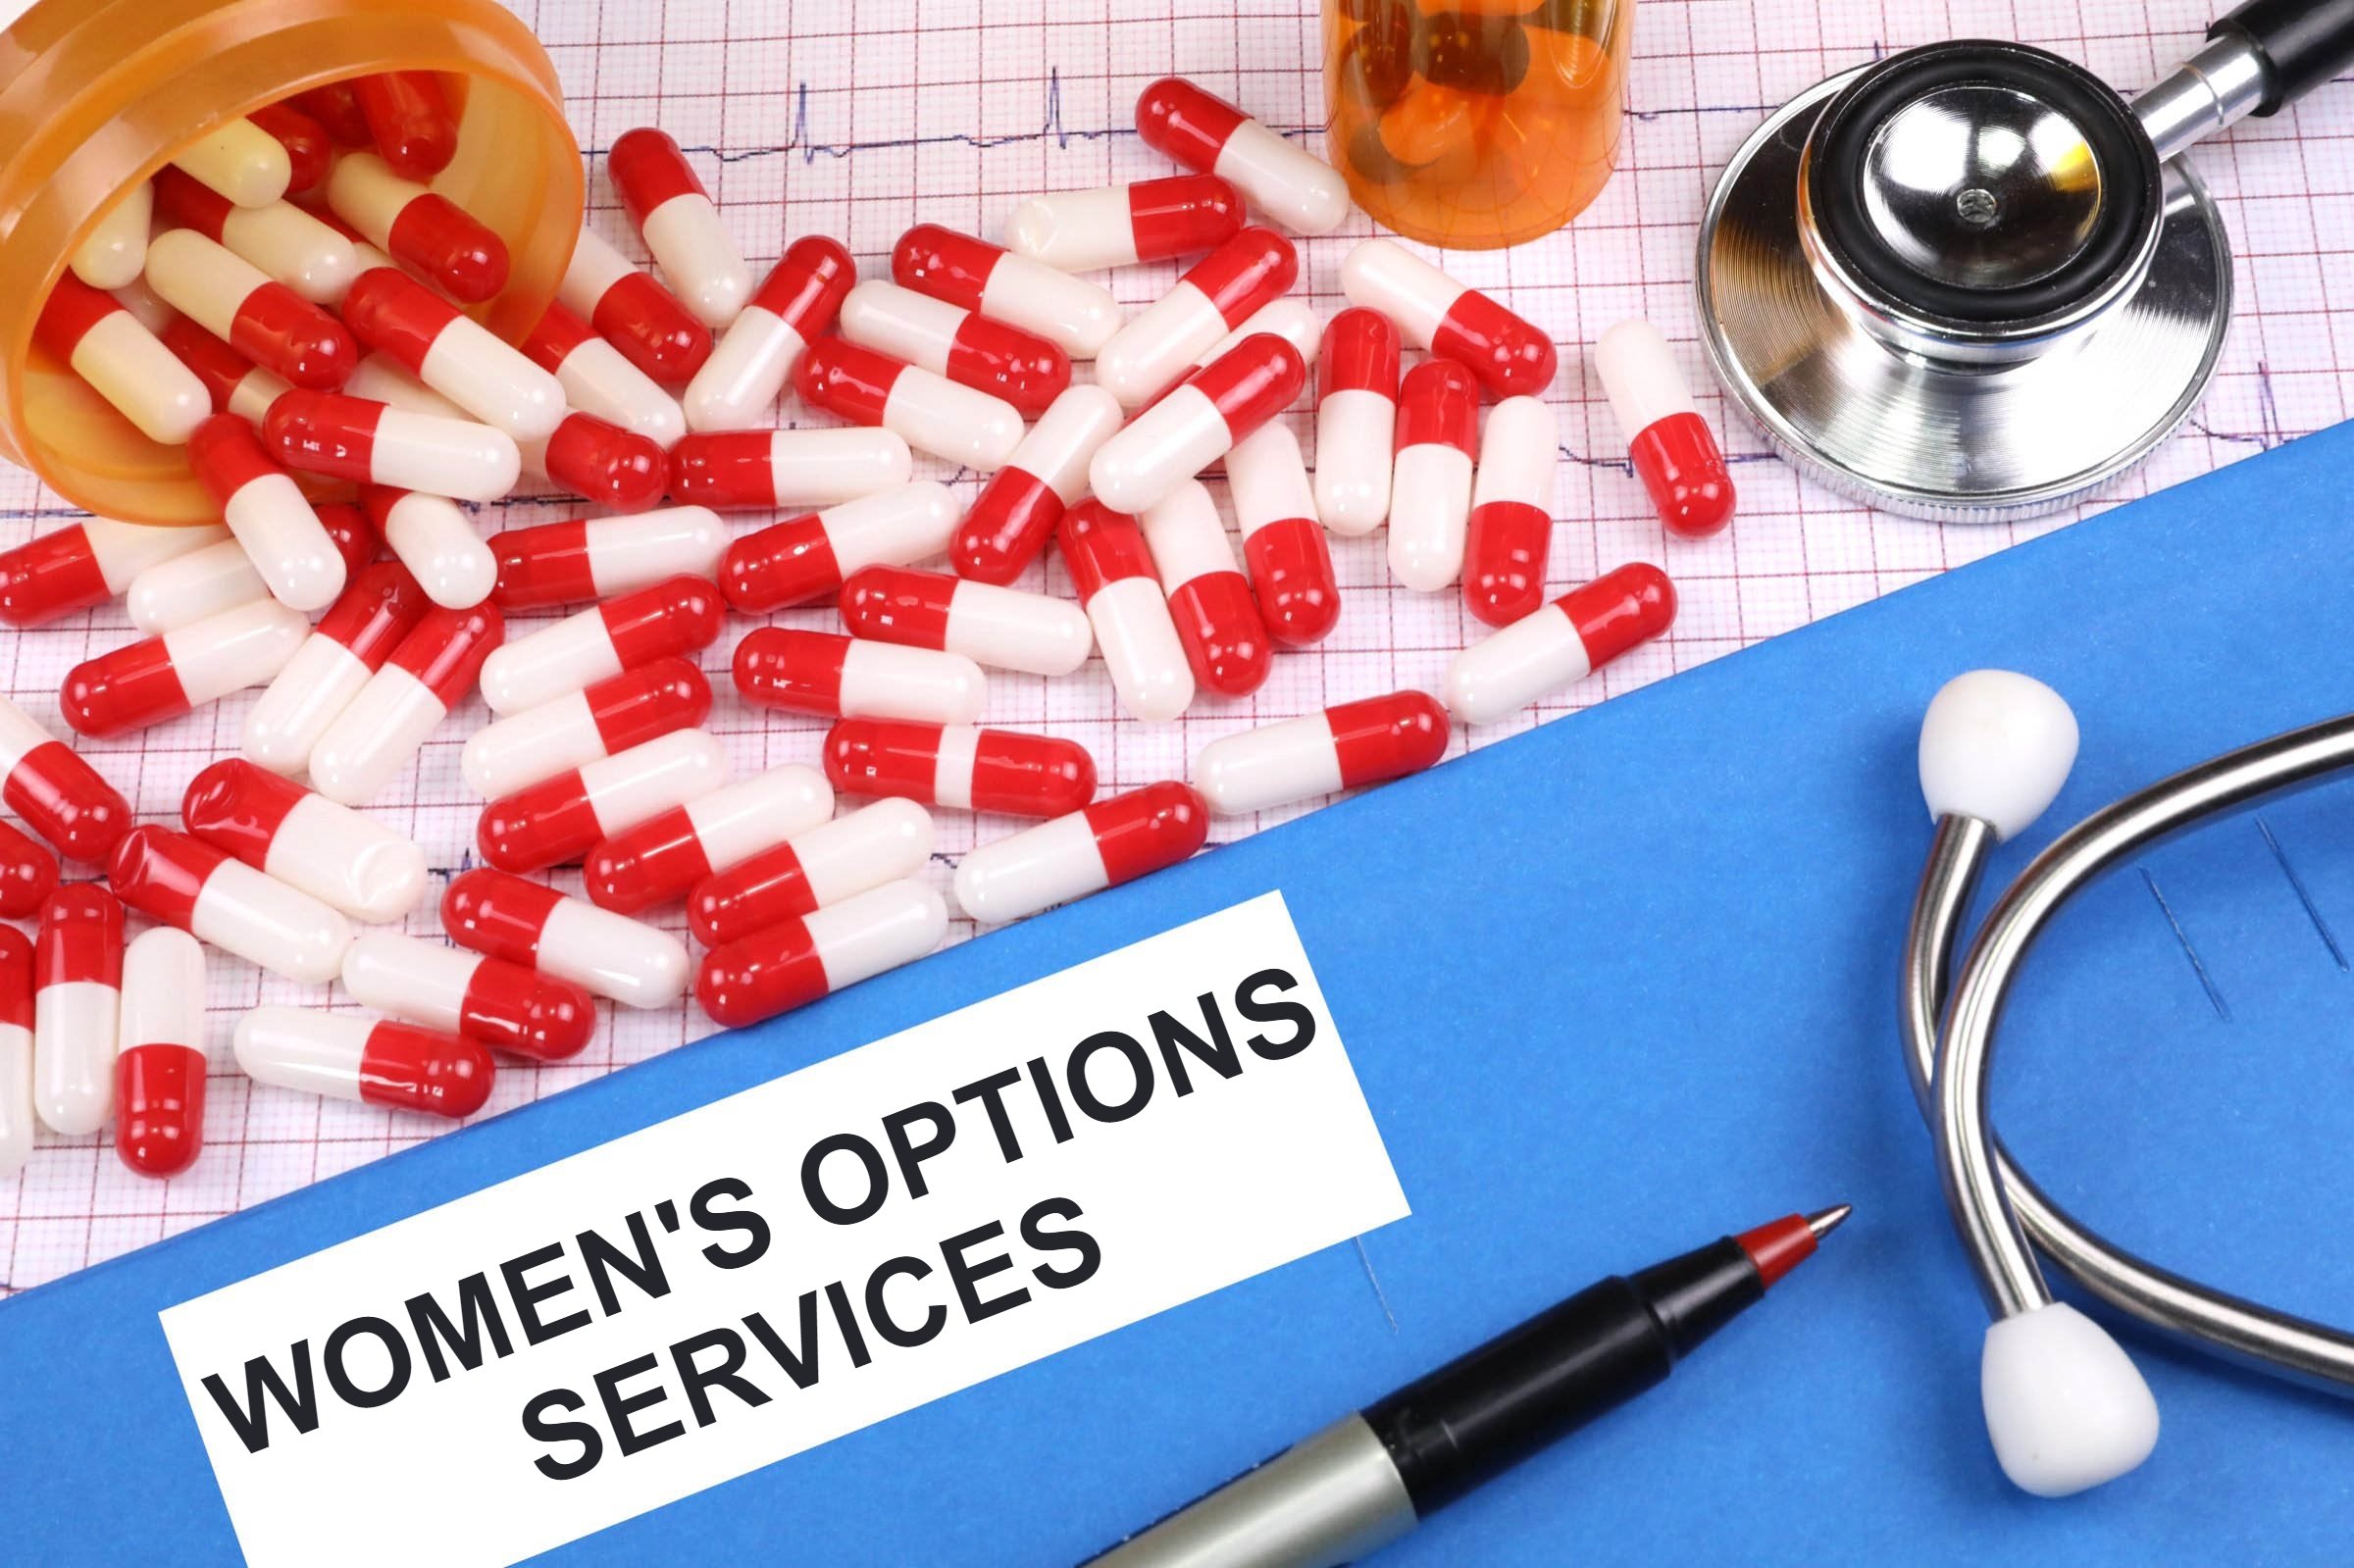 womens options services